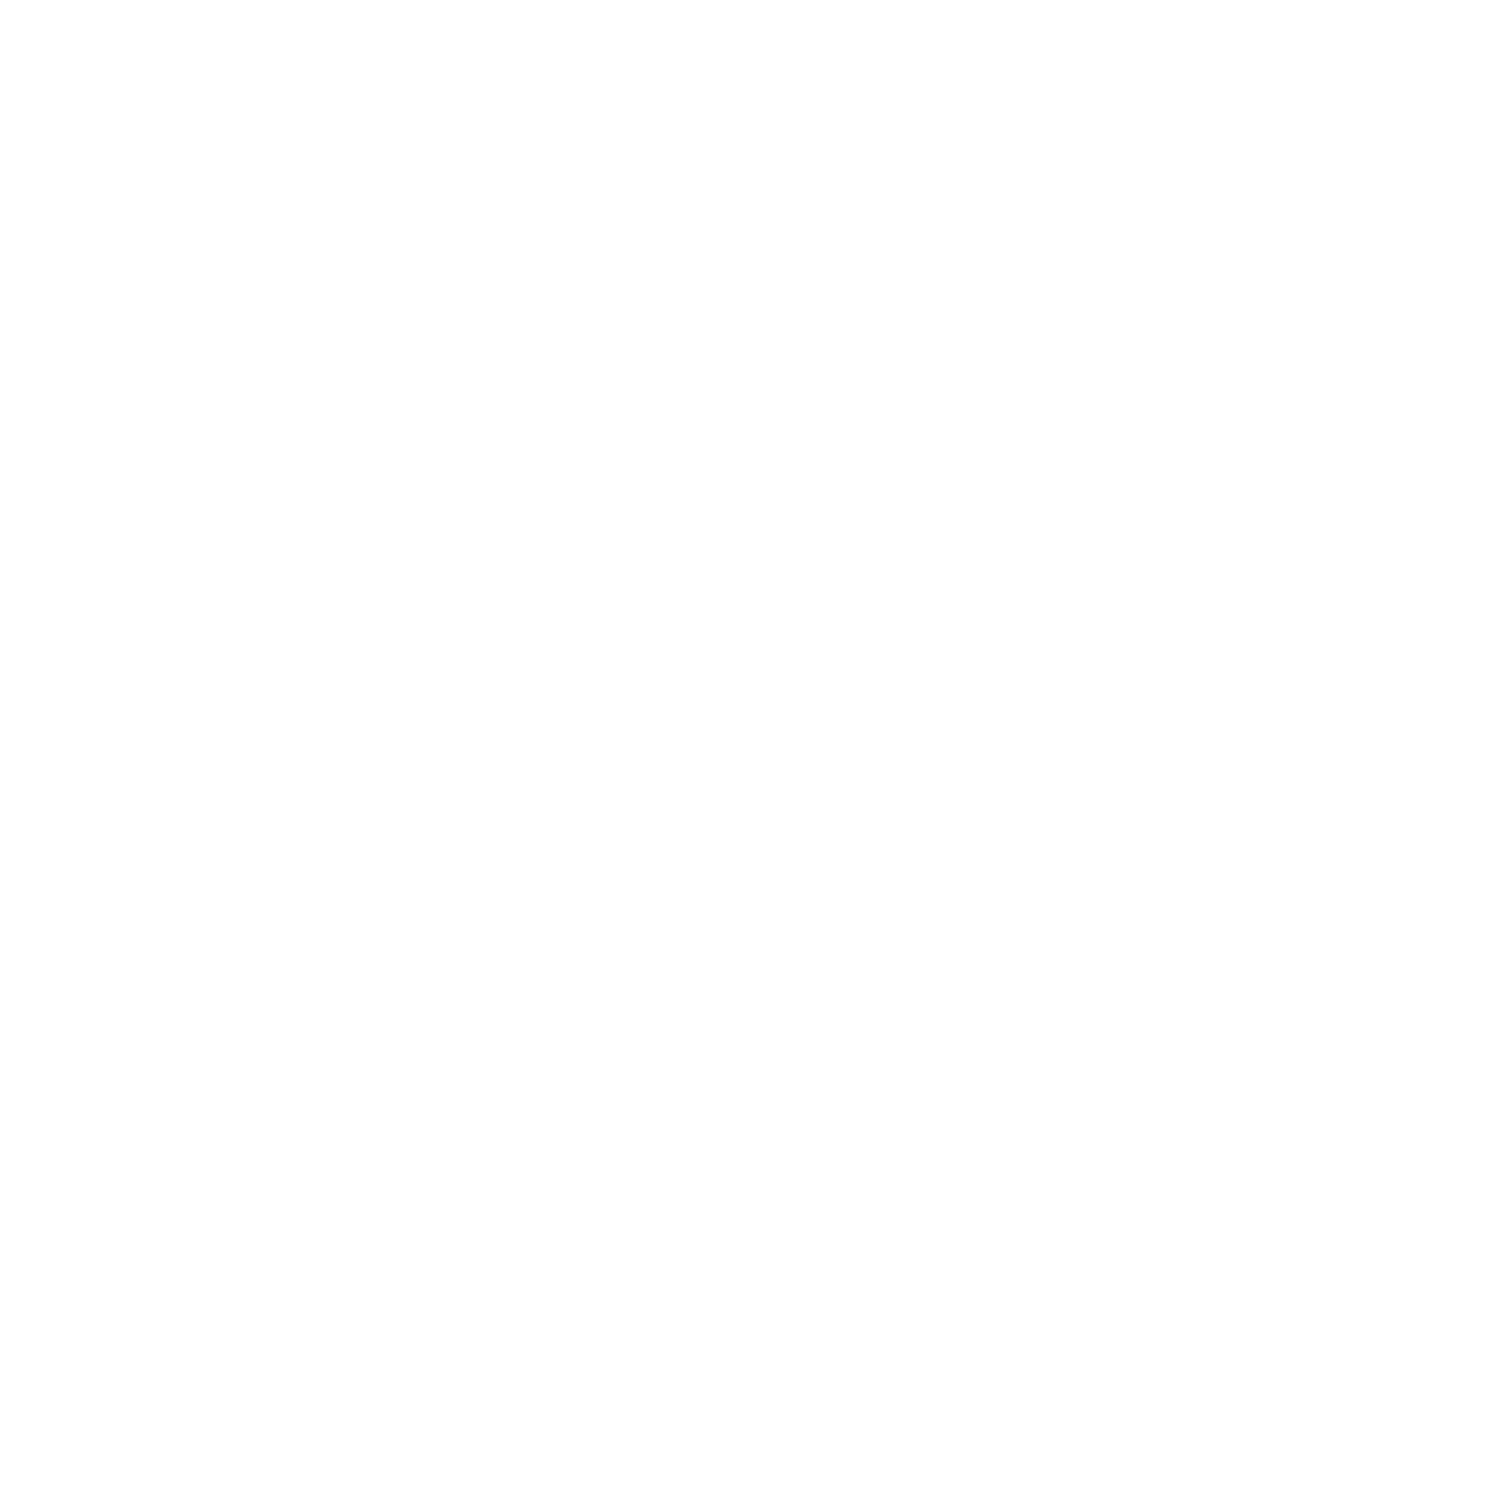 MODE EVENTS